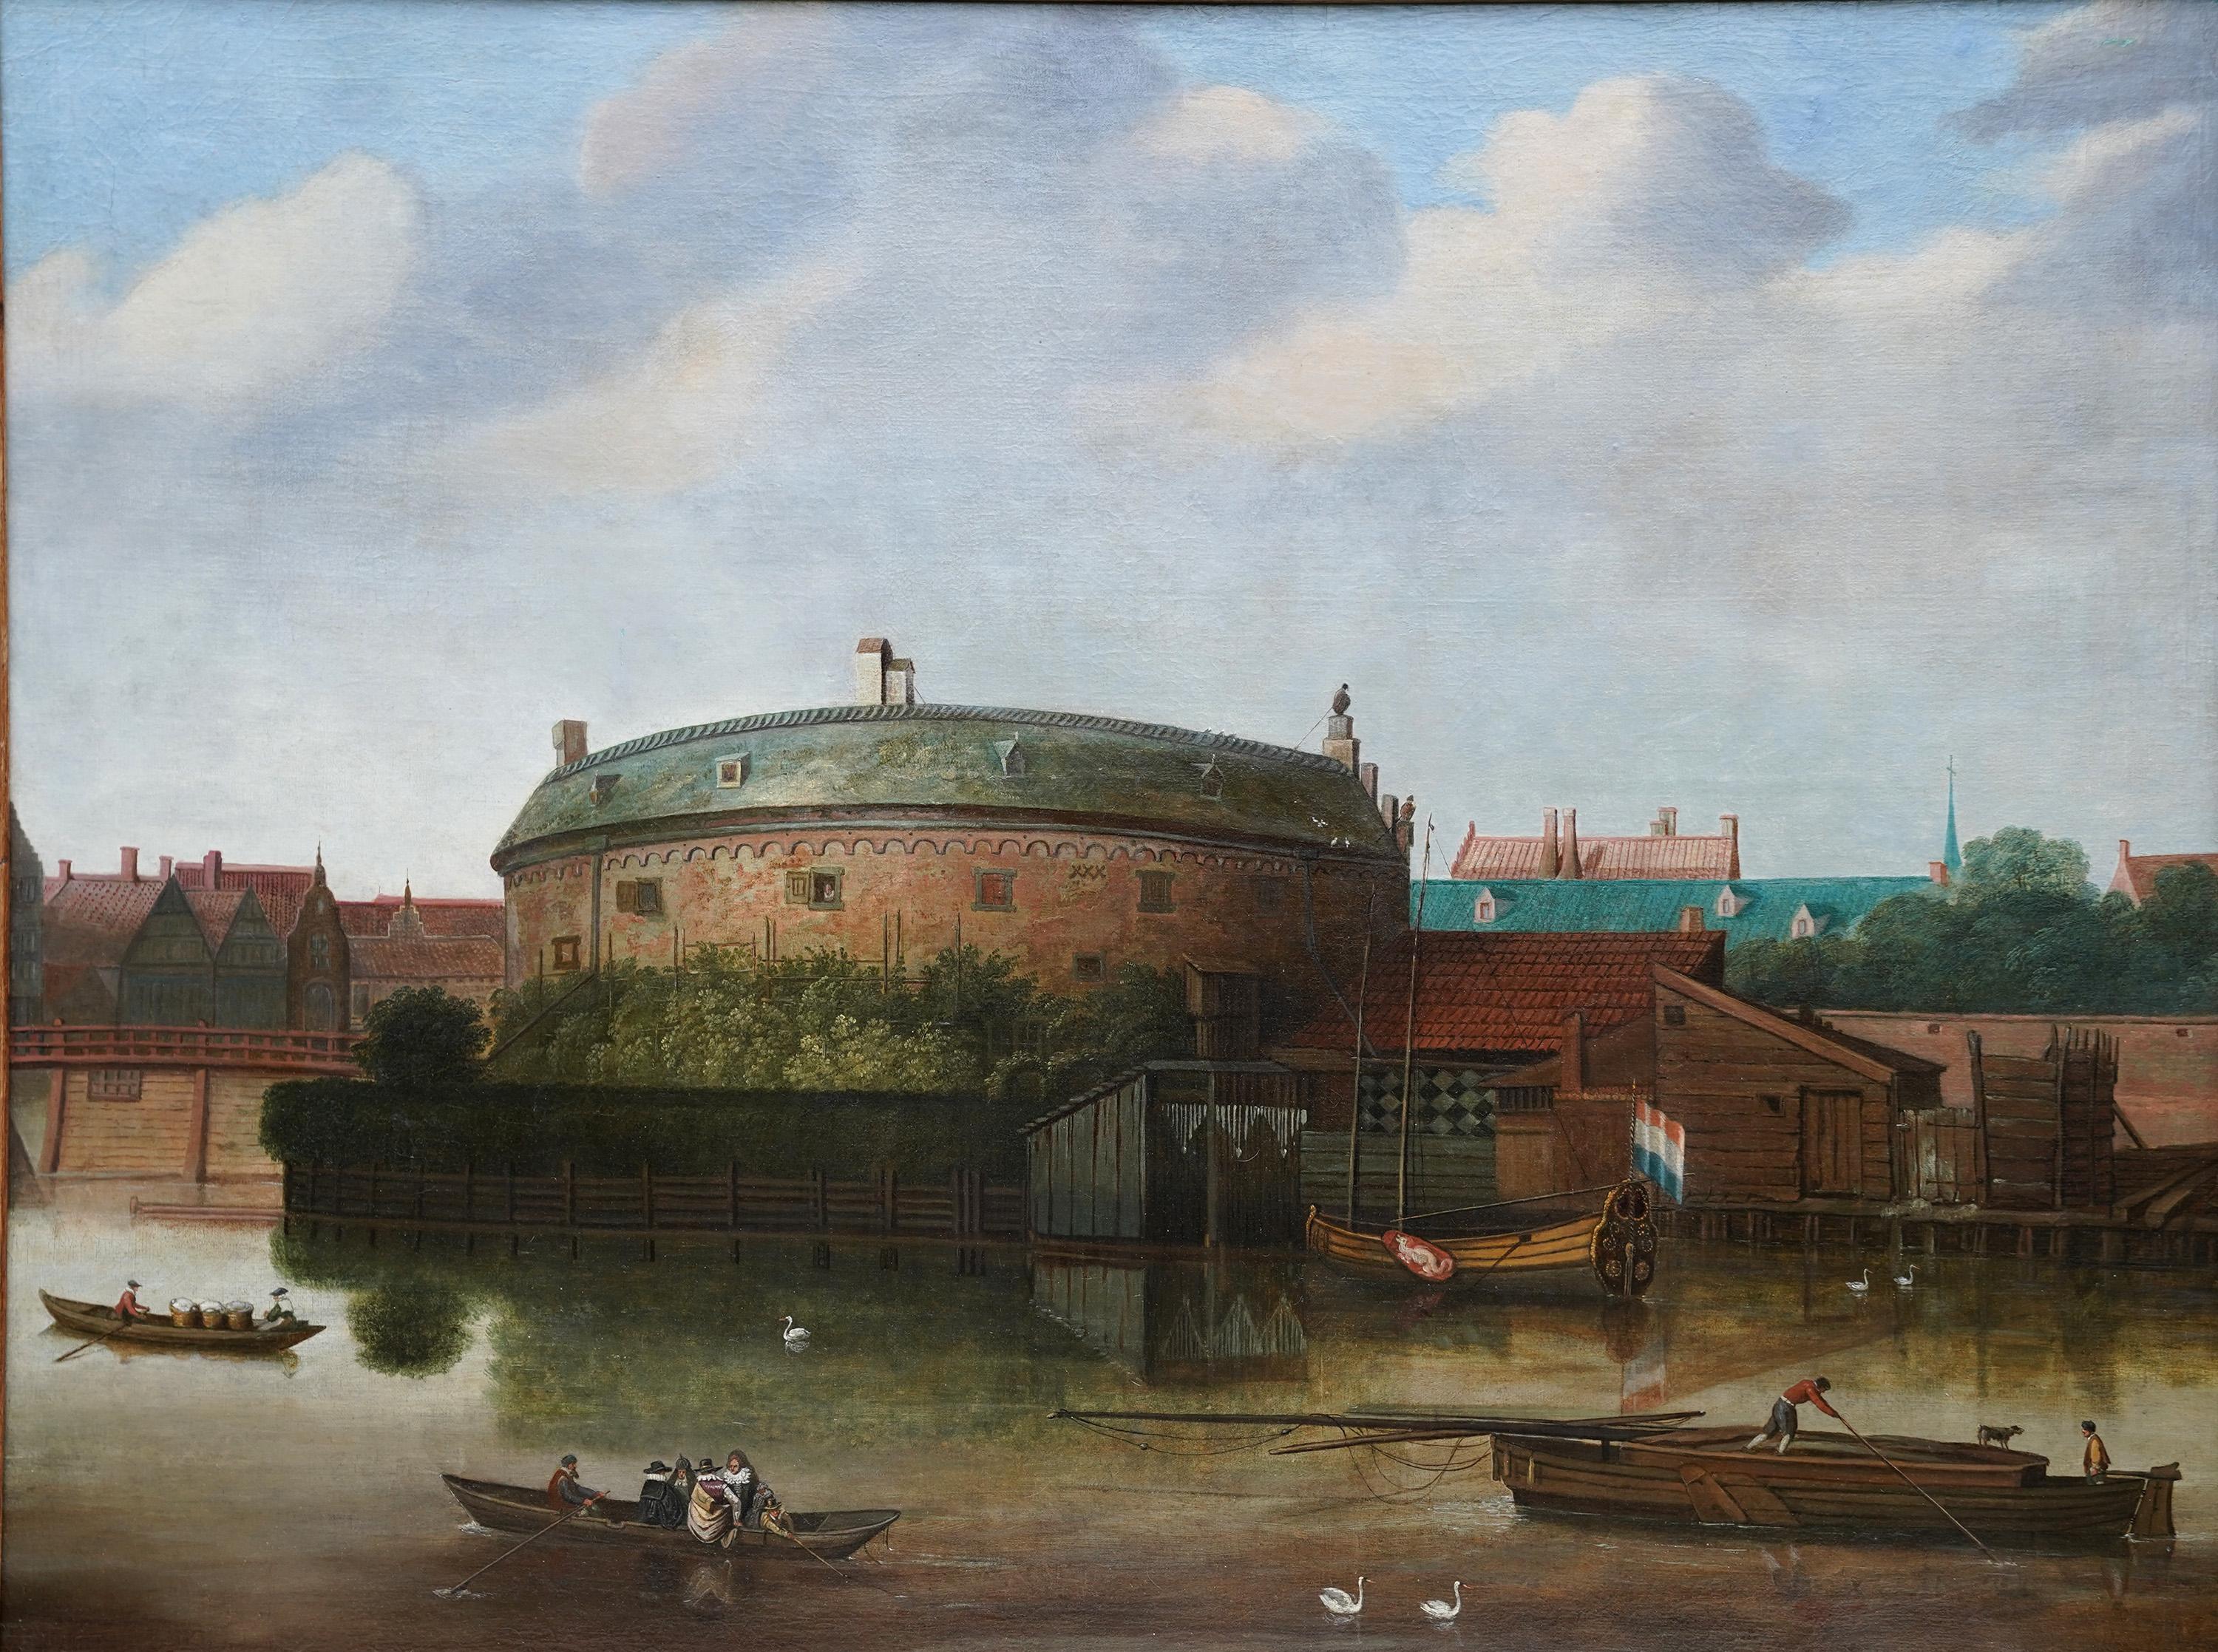 River Scene with Boats and Rotunda Building - Dutch 18th/19thC art oil painting - Painting by Bernardo Bellotto (circle)